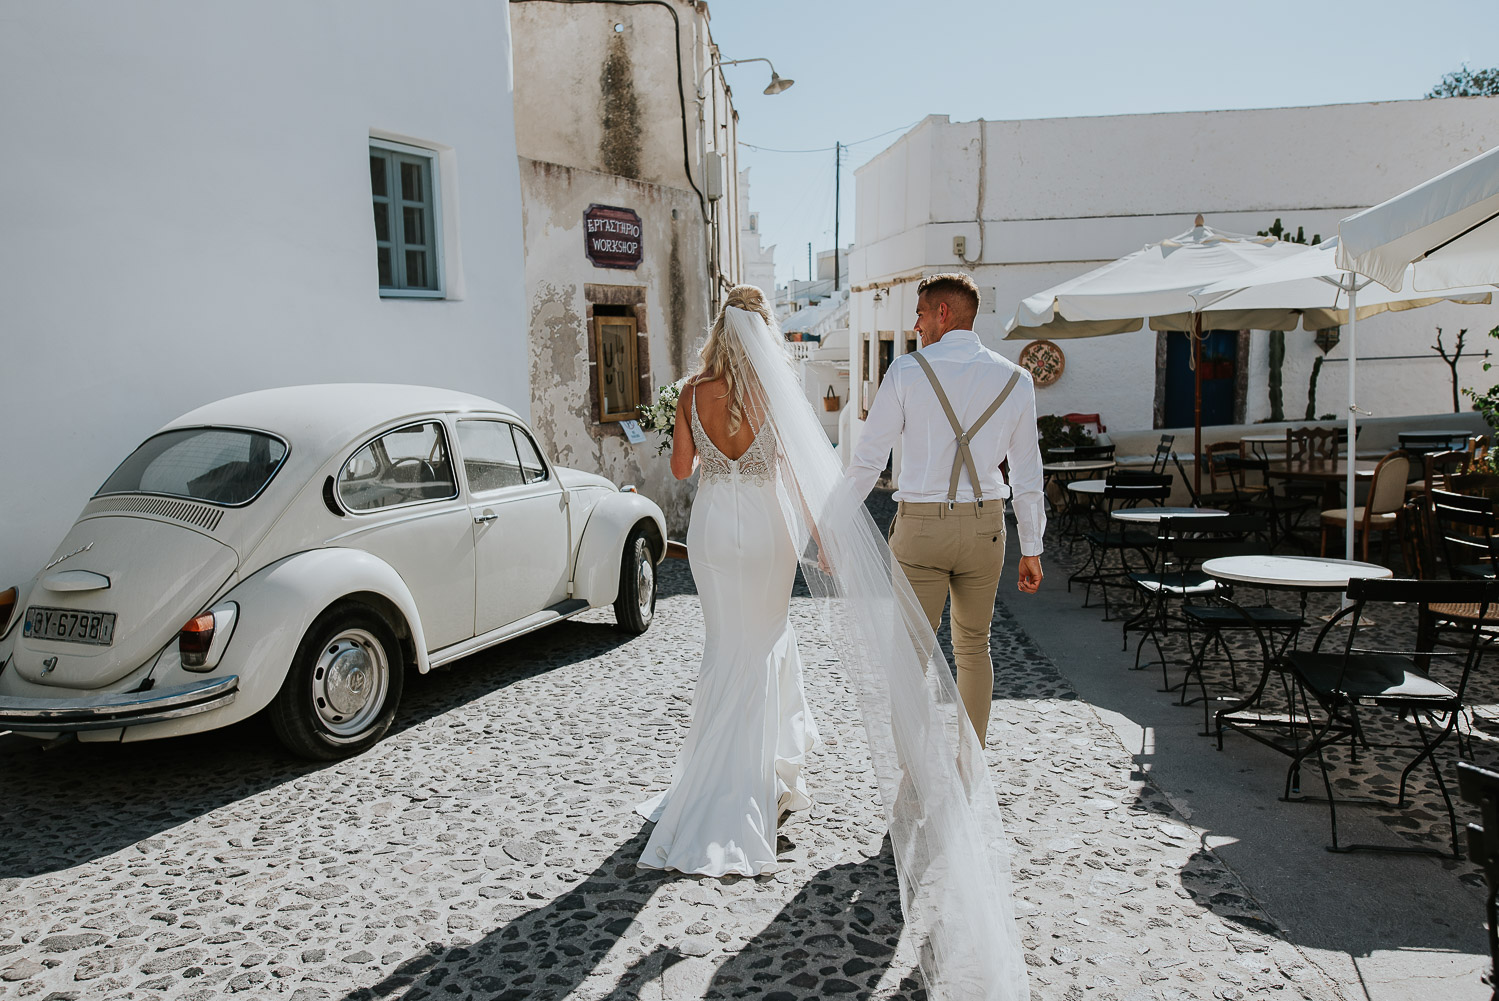 Wedding photographer Santorini: bride and groom crossing a cobbled stone square with old beetle car parked by Ben and Vesna.